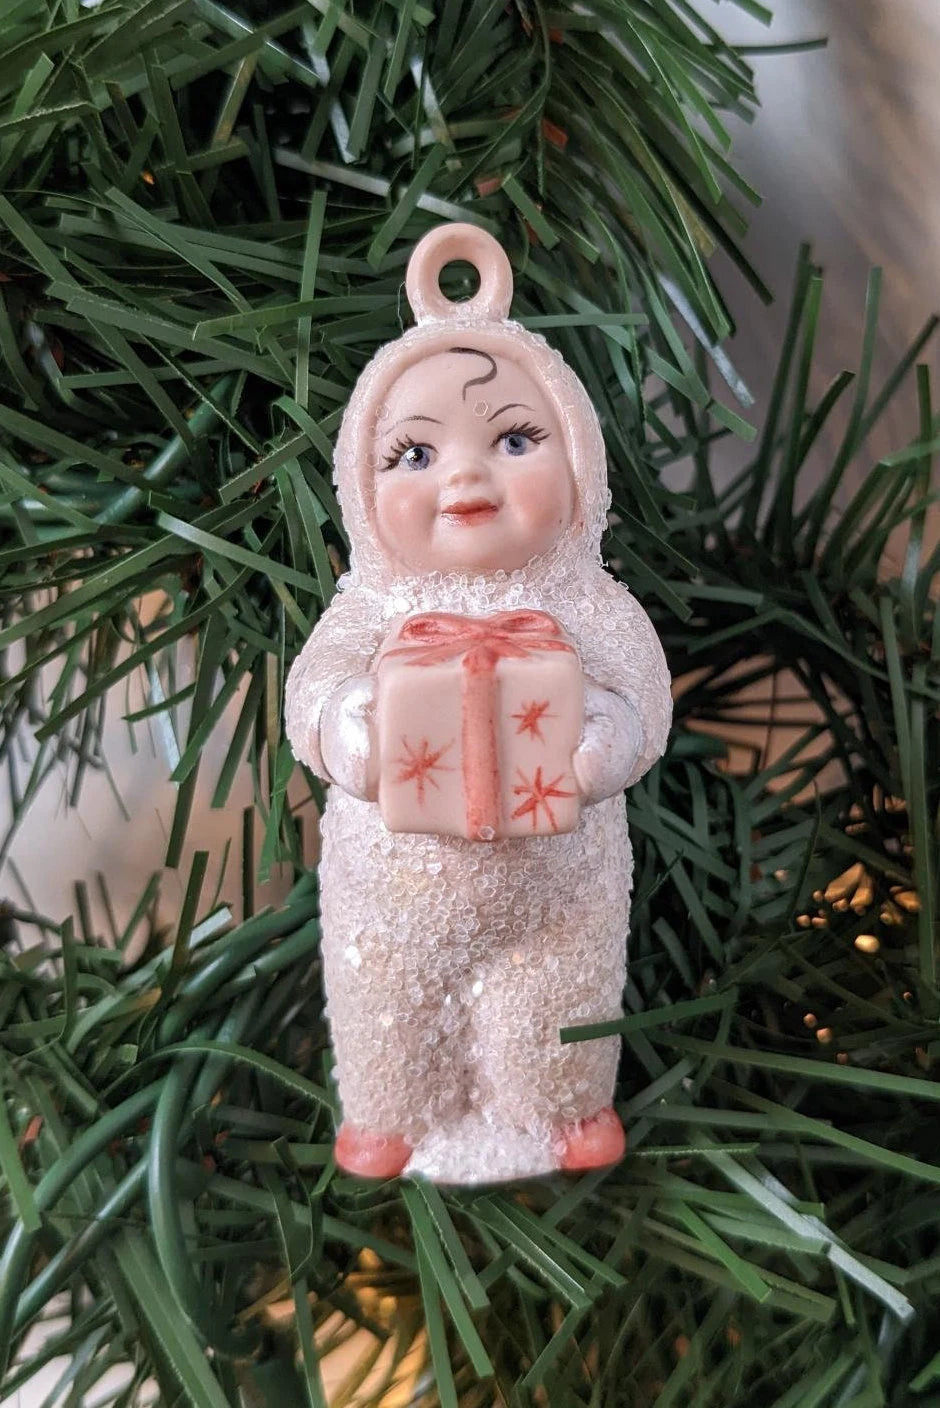 Vintage Little Girl with Gift Christmas Ornament